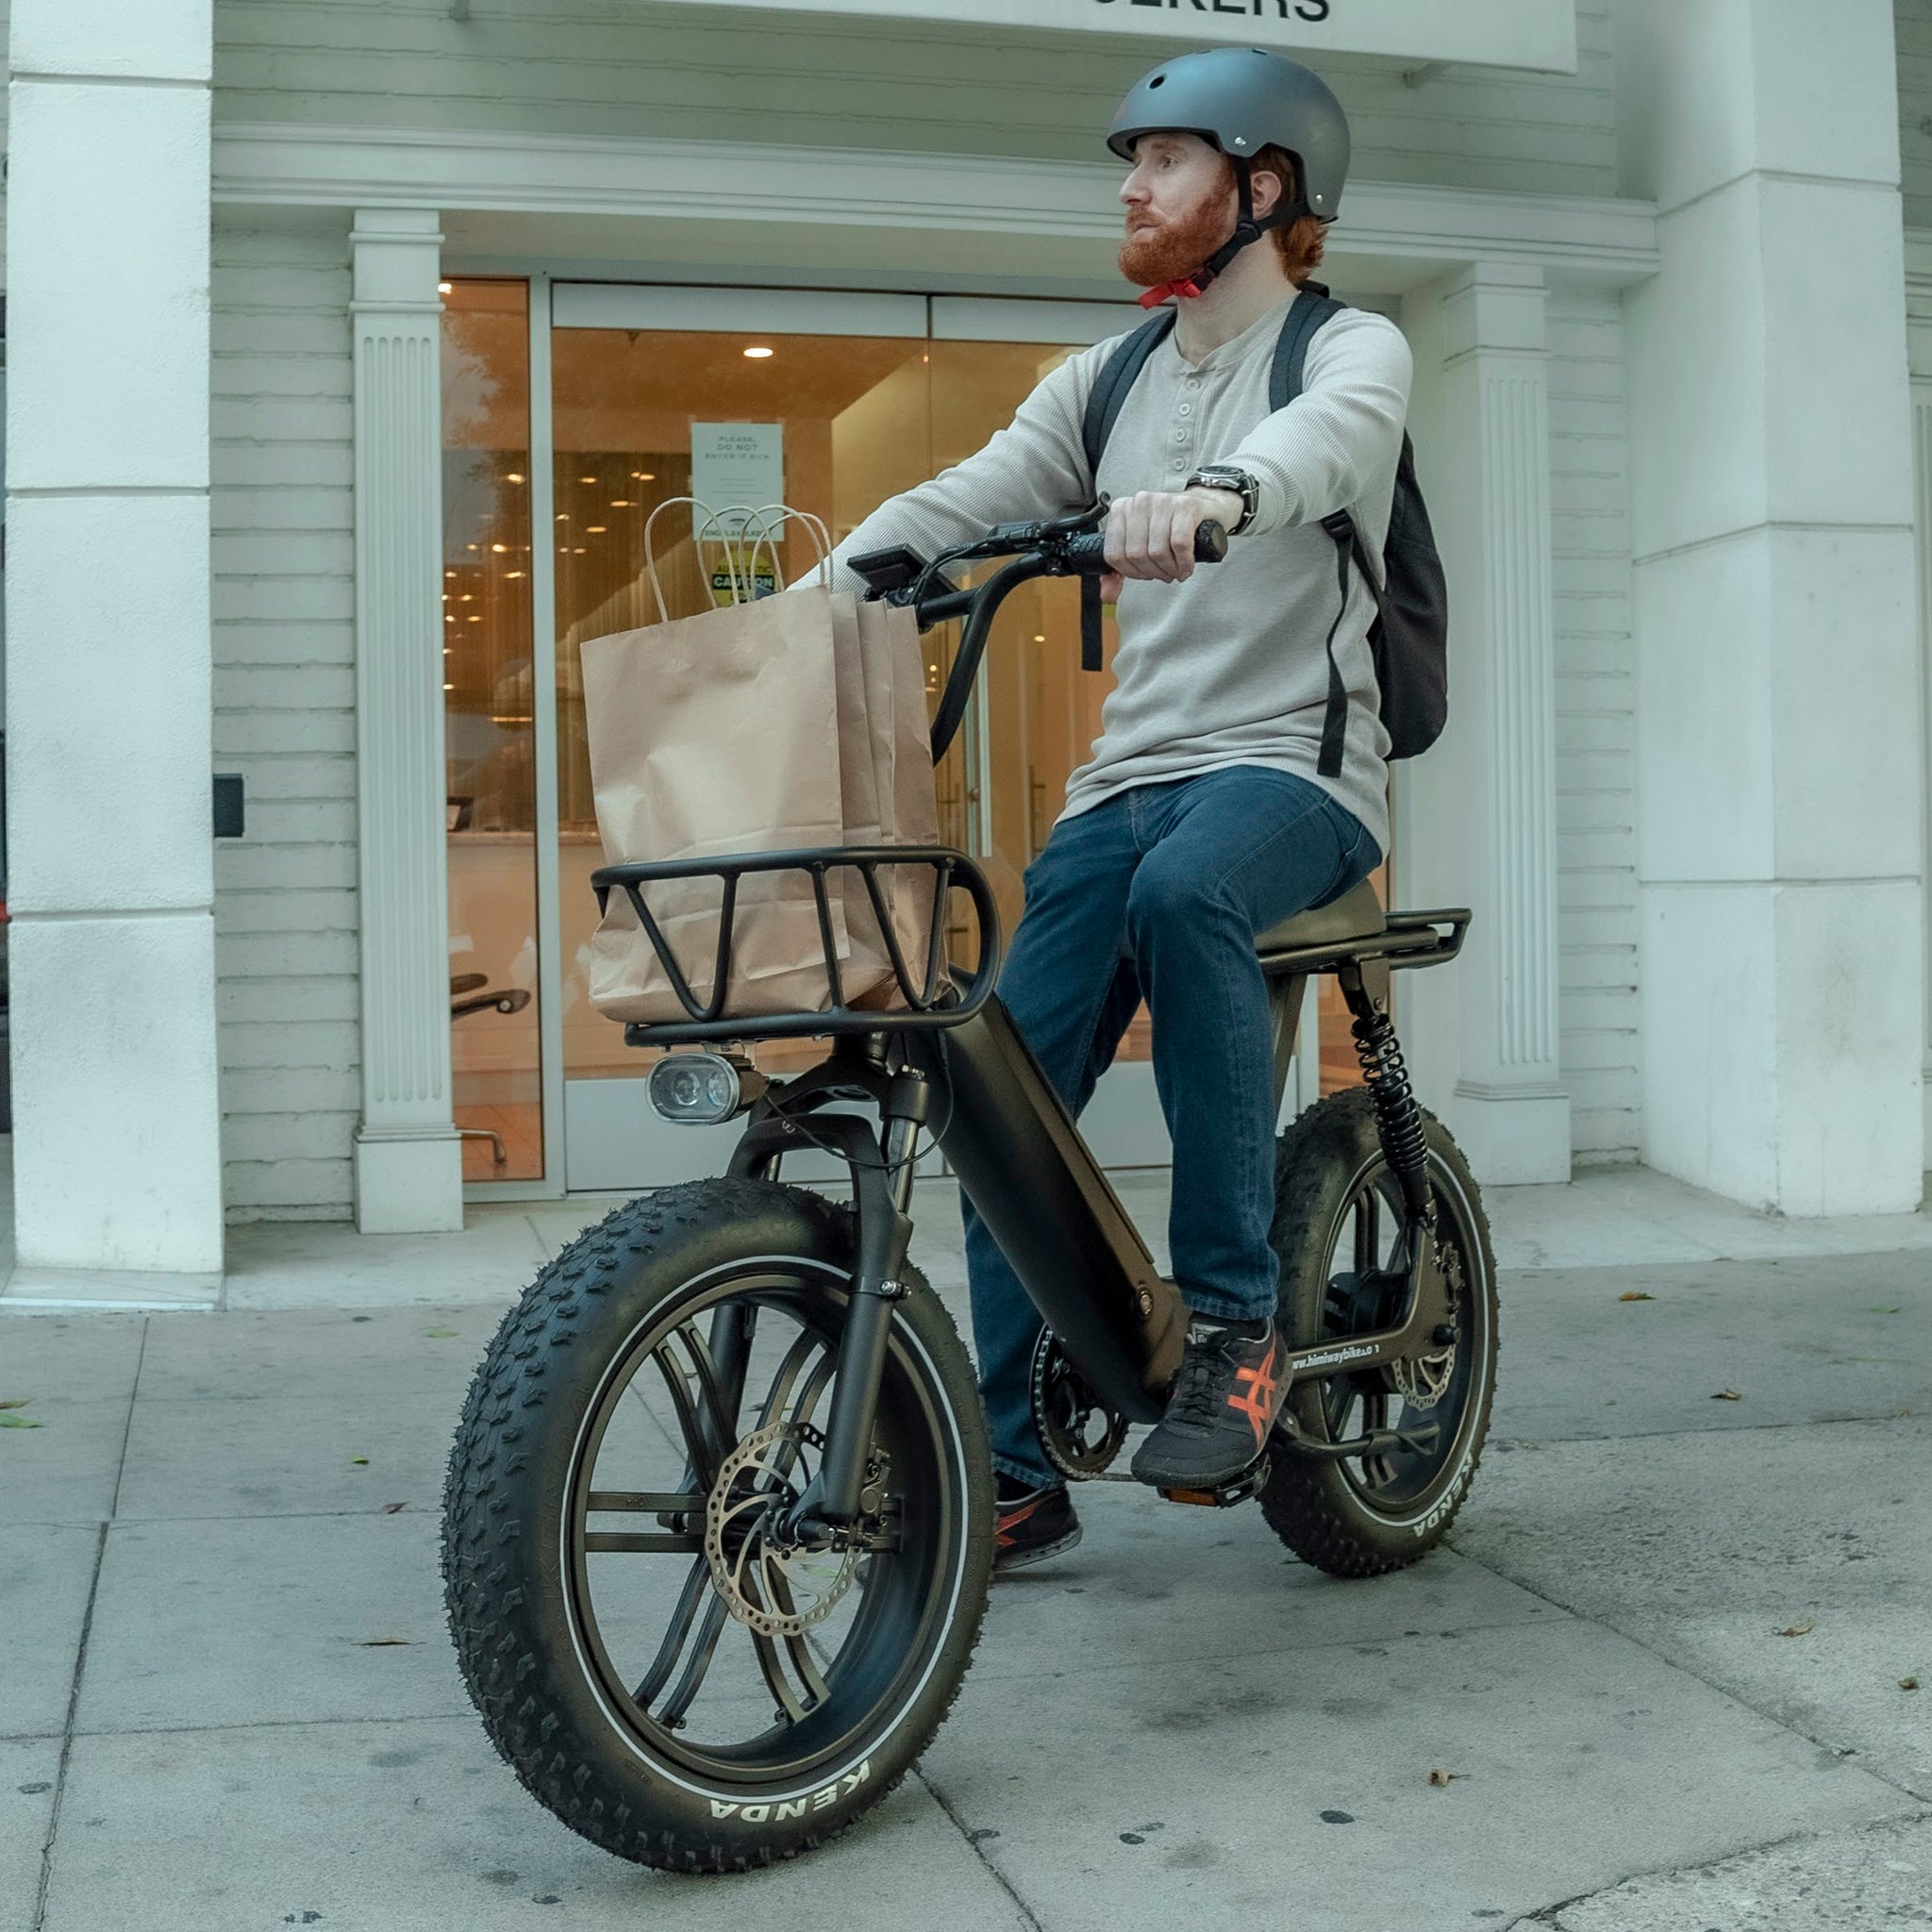 A man with Moped-Style Electric Bike